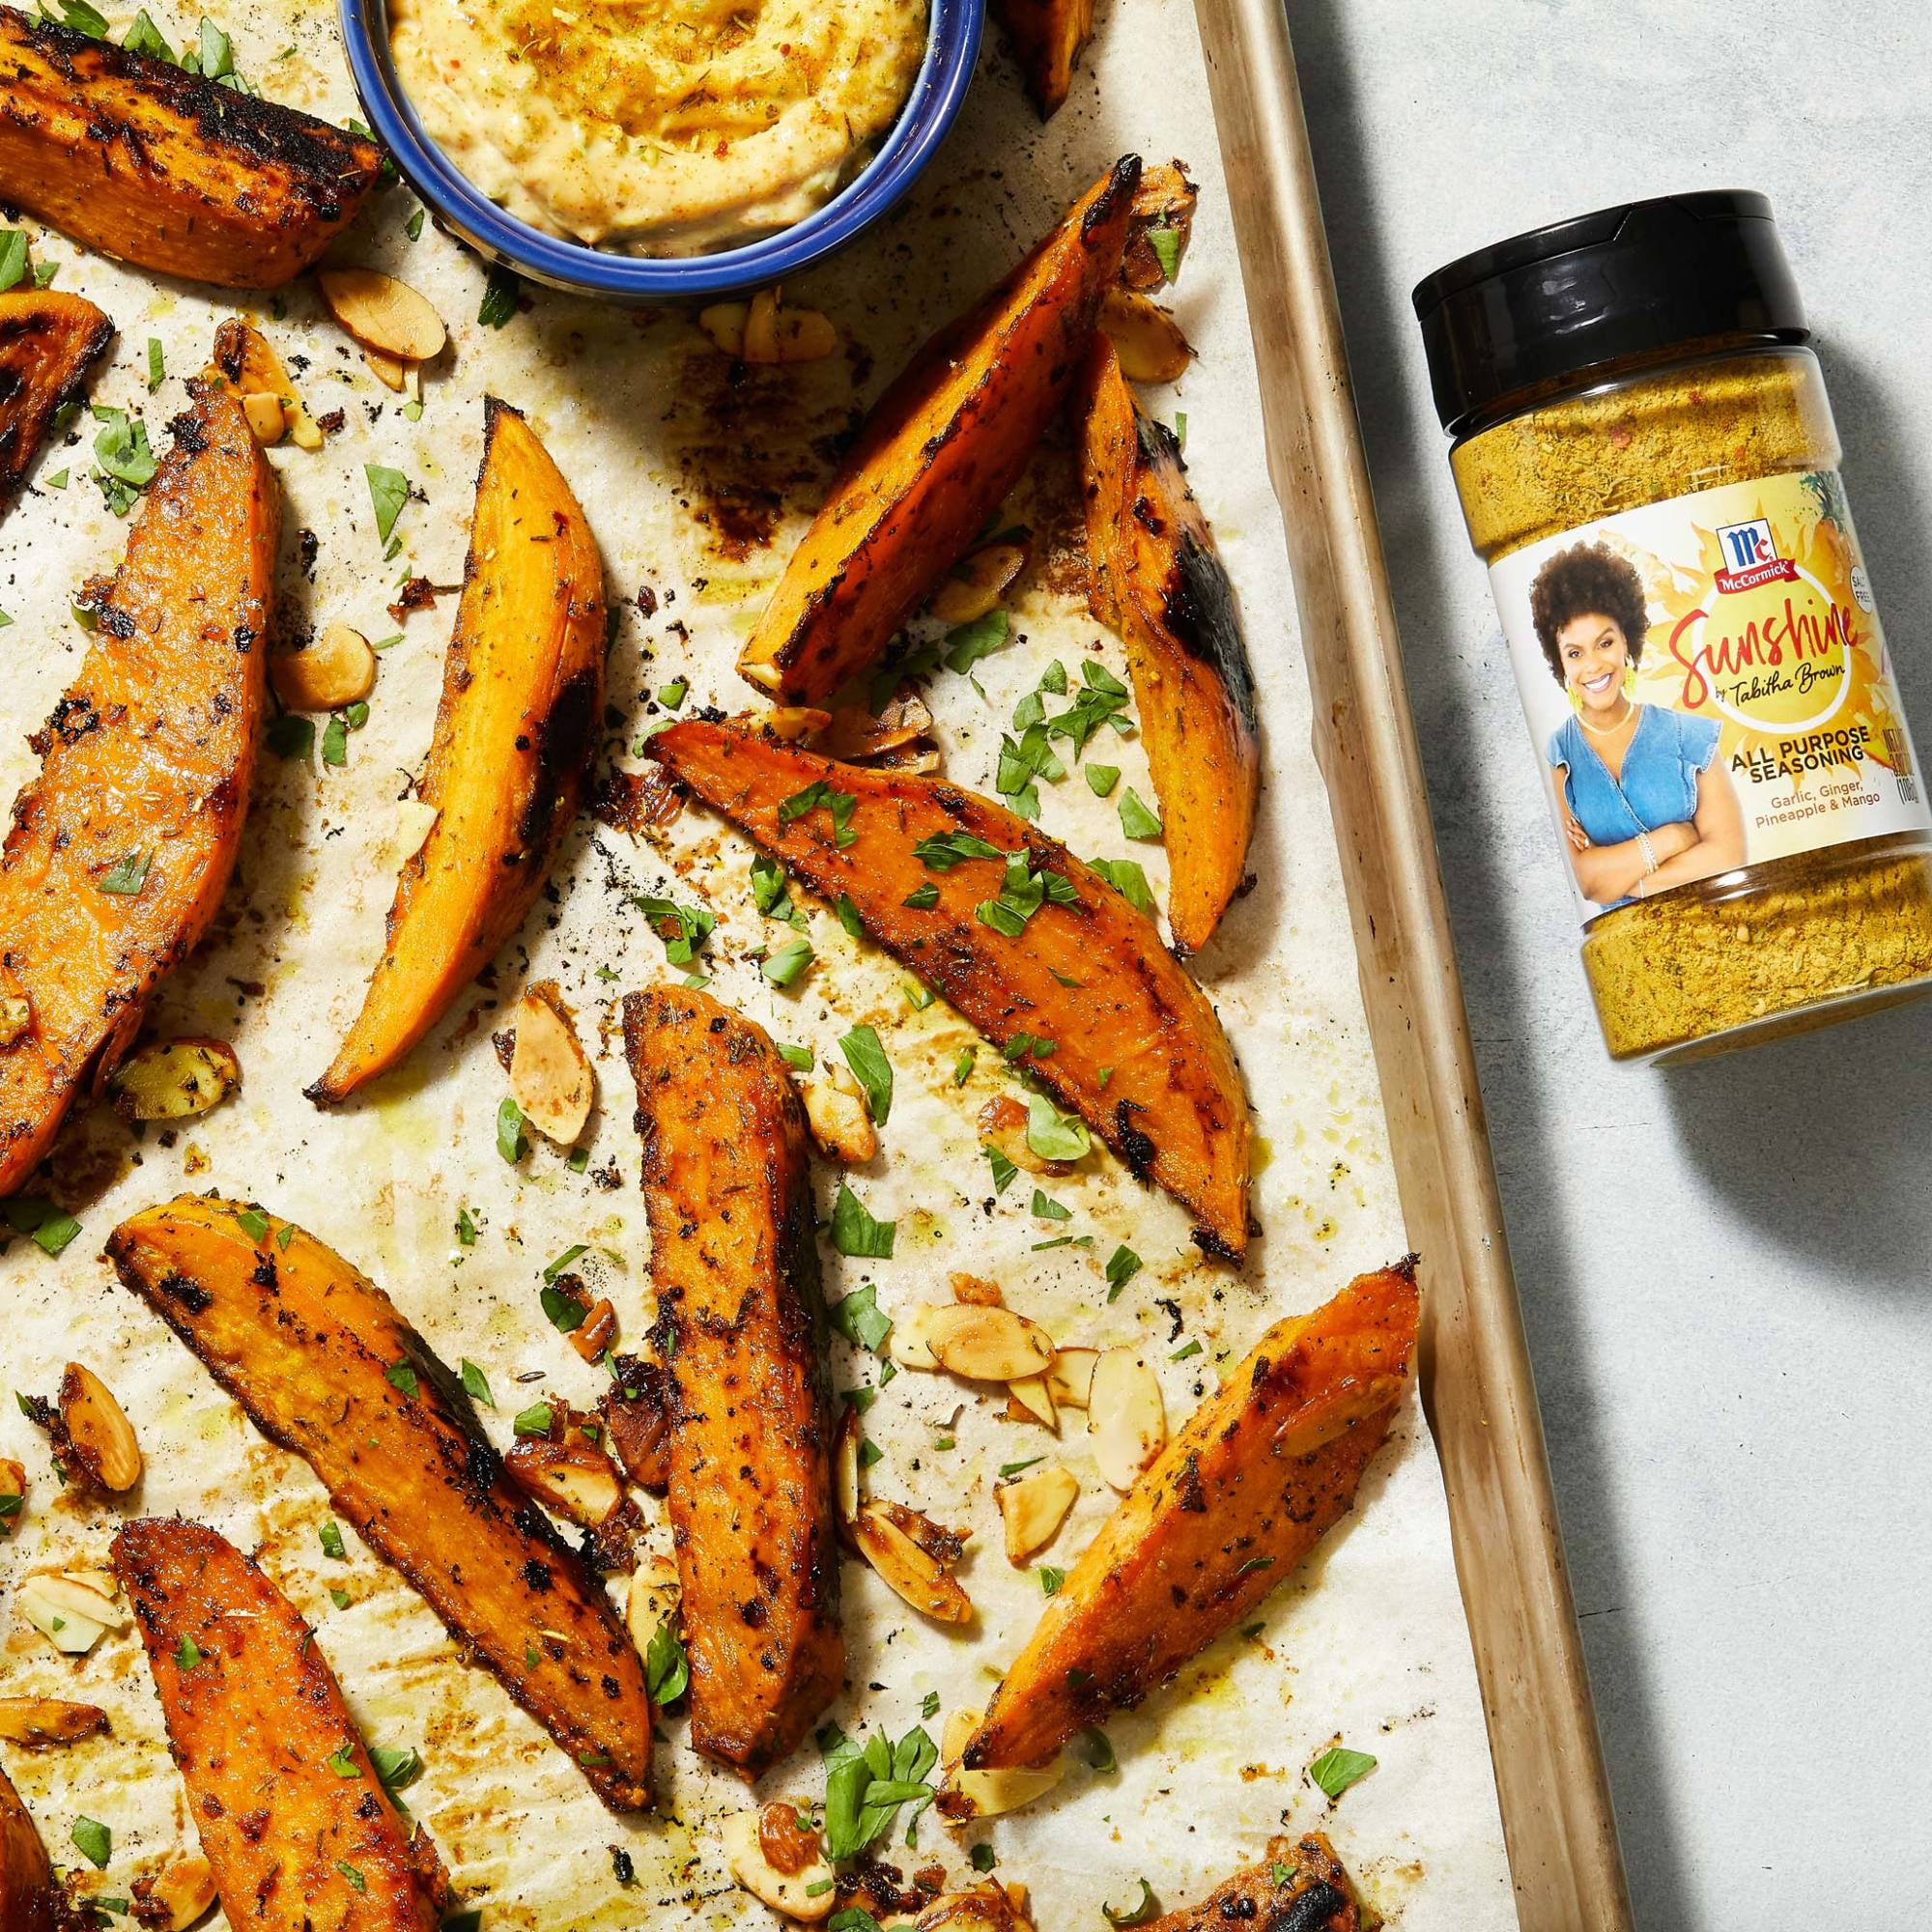 Tabitha Brown Expands Her McCormick Spice Line With 5 Salt-Free Blends